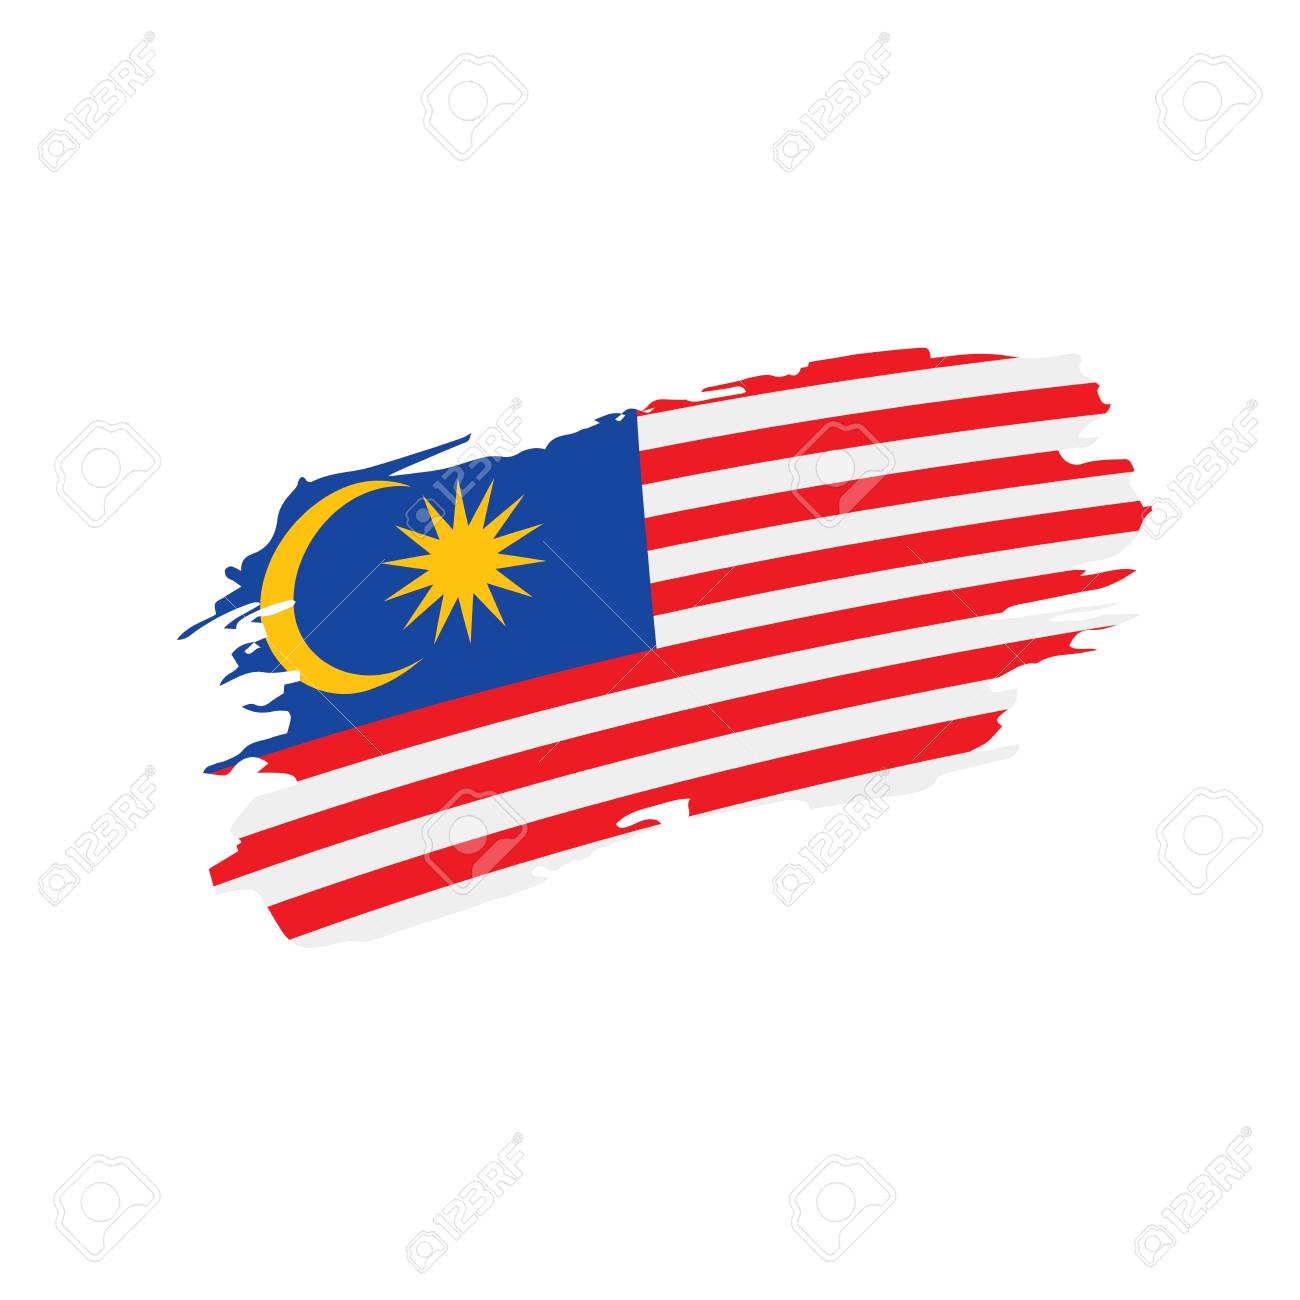 Malaysia Flag Vector Illustration On A White Background Royalty